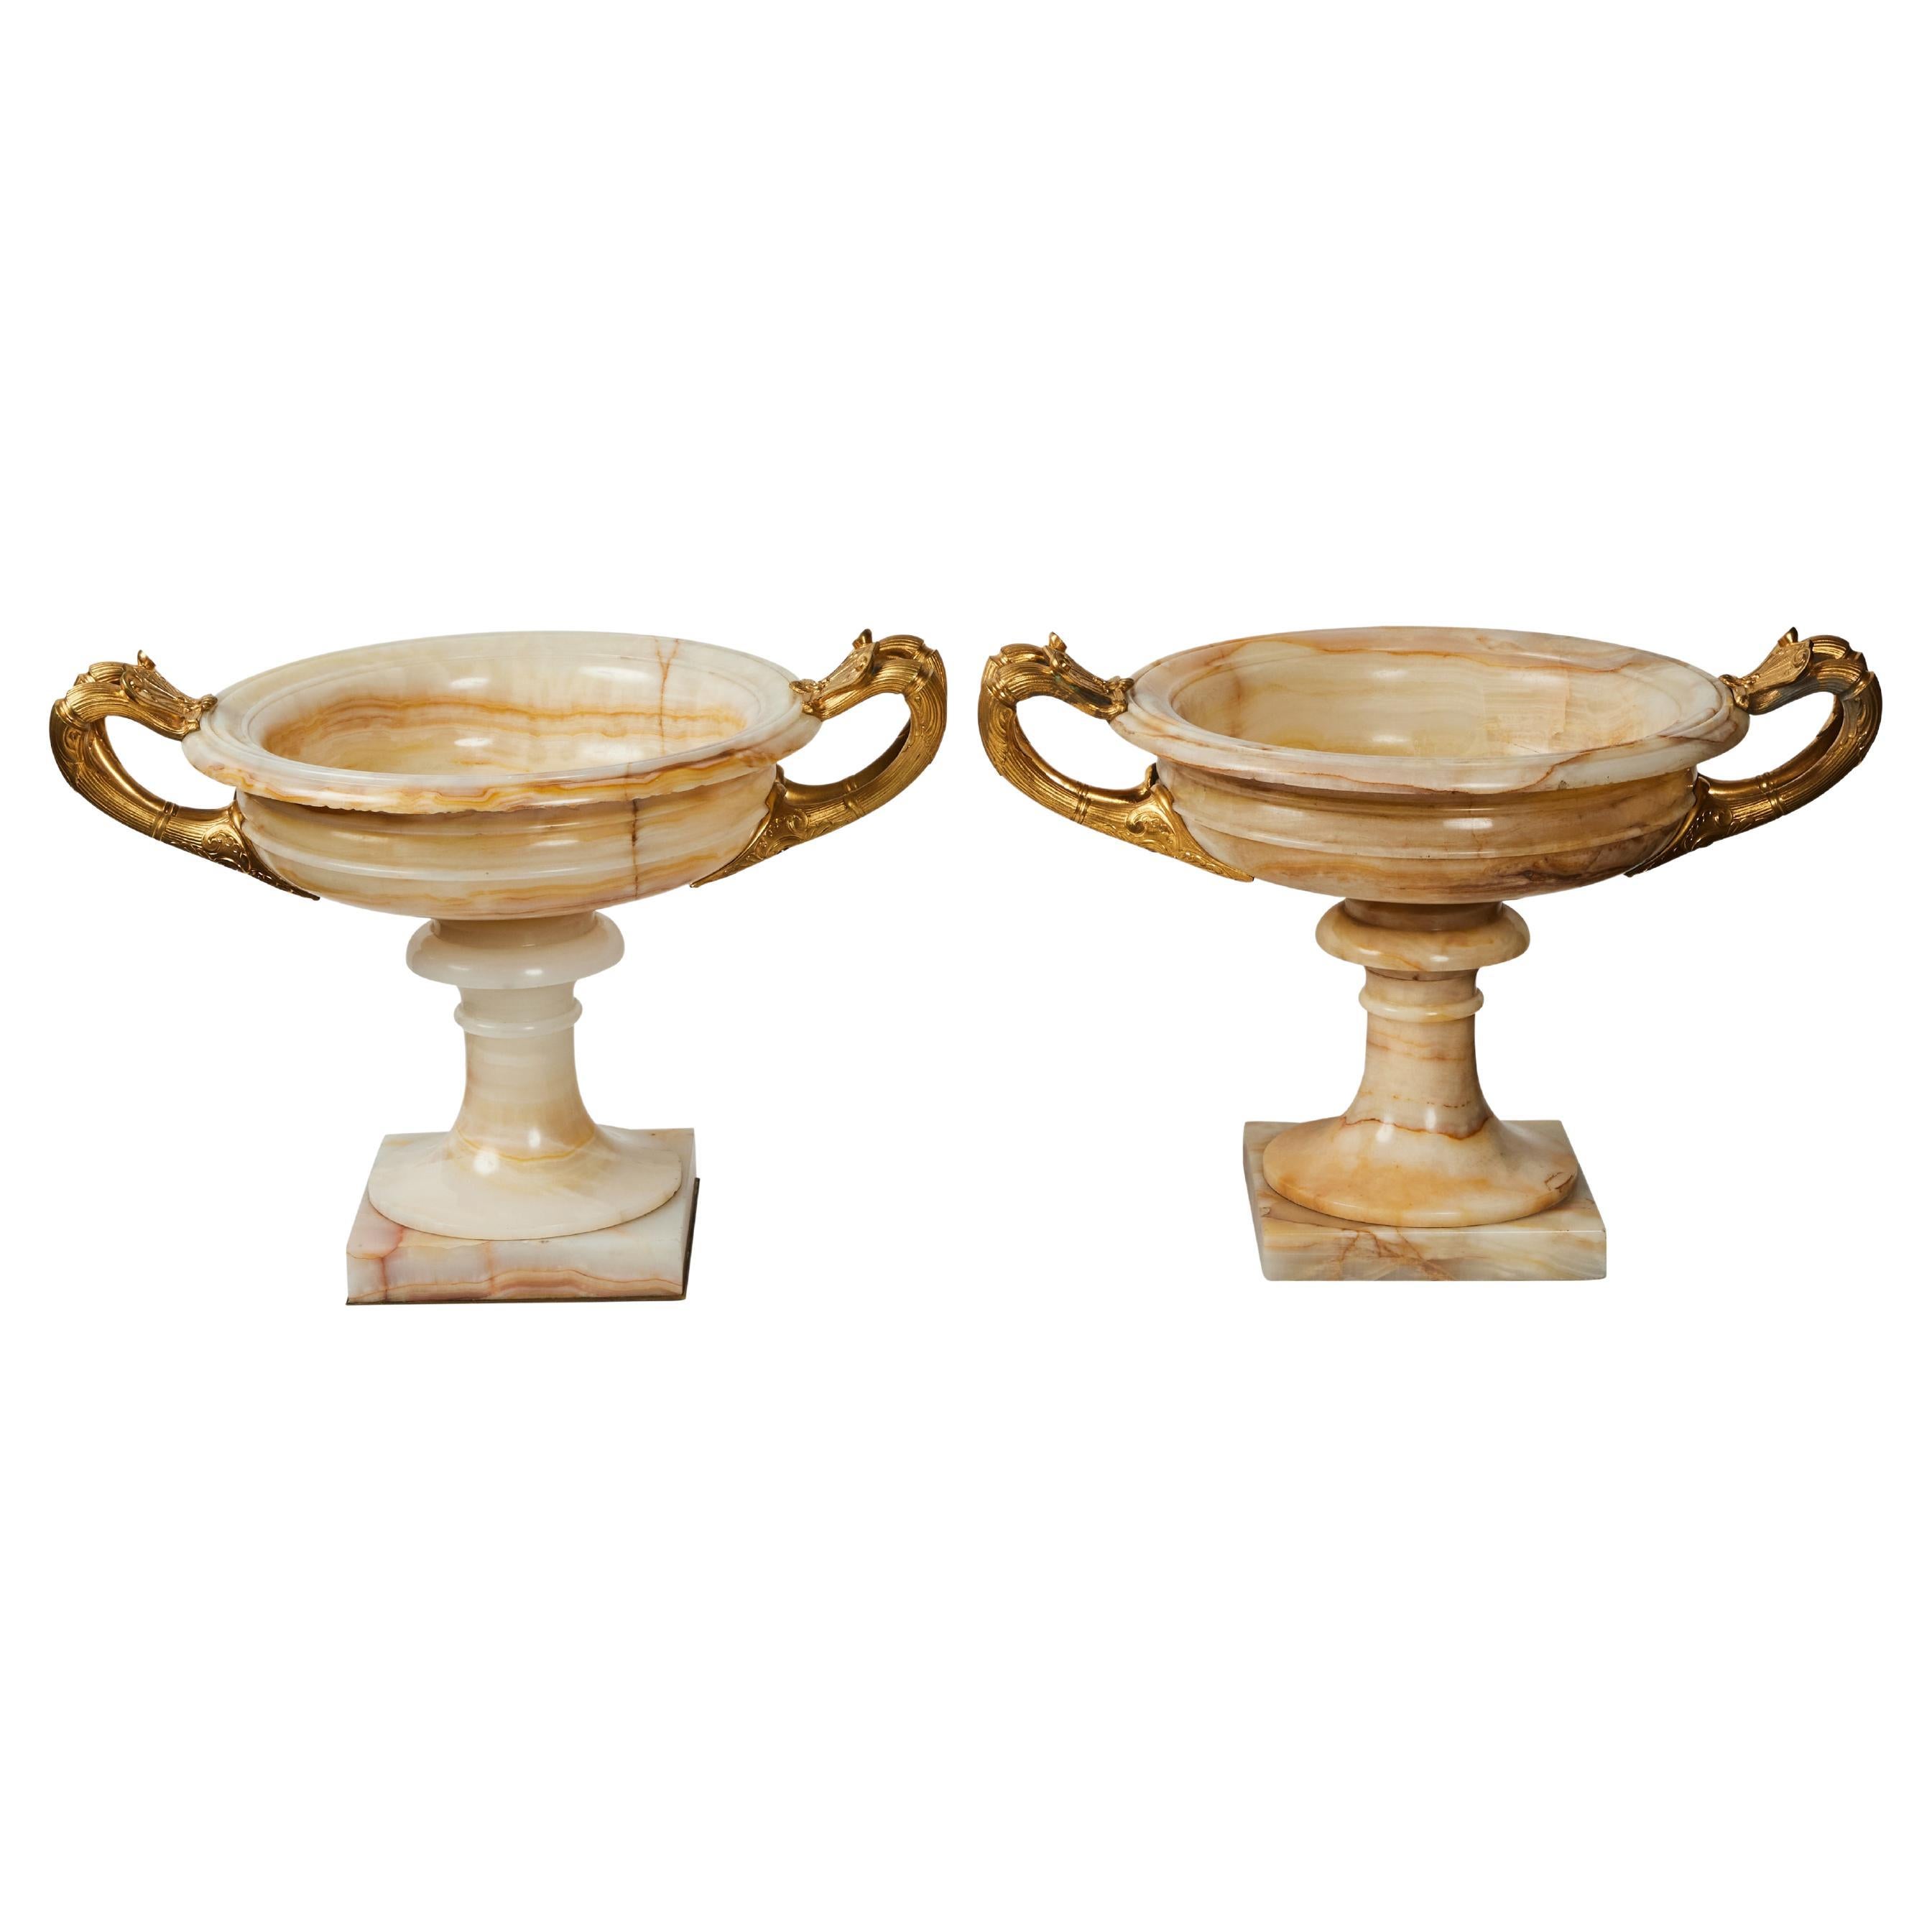 Pair of French Empire Style Onyx and Gilded Bronze Tazzas